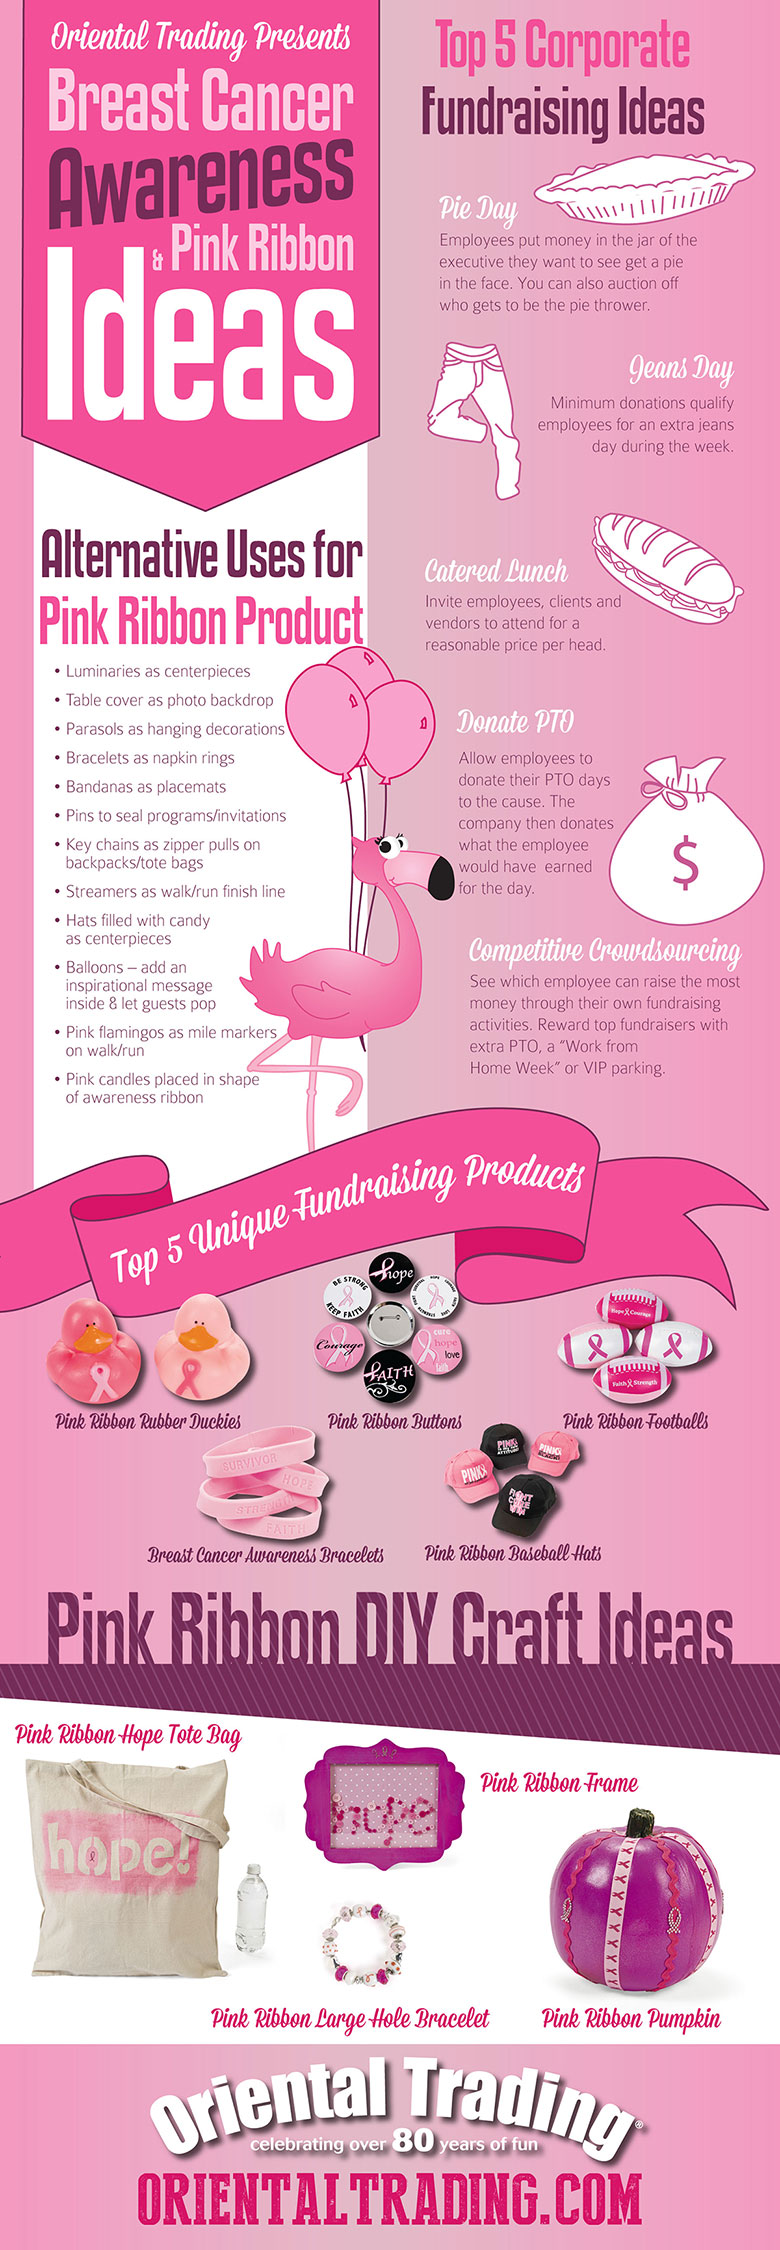 Breast Cancer Awareness Infographic by OrientalTrading.com